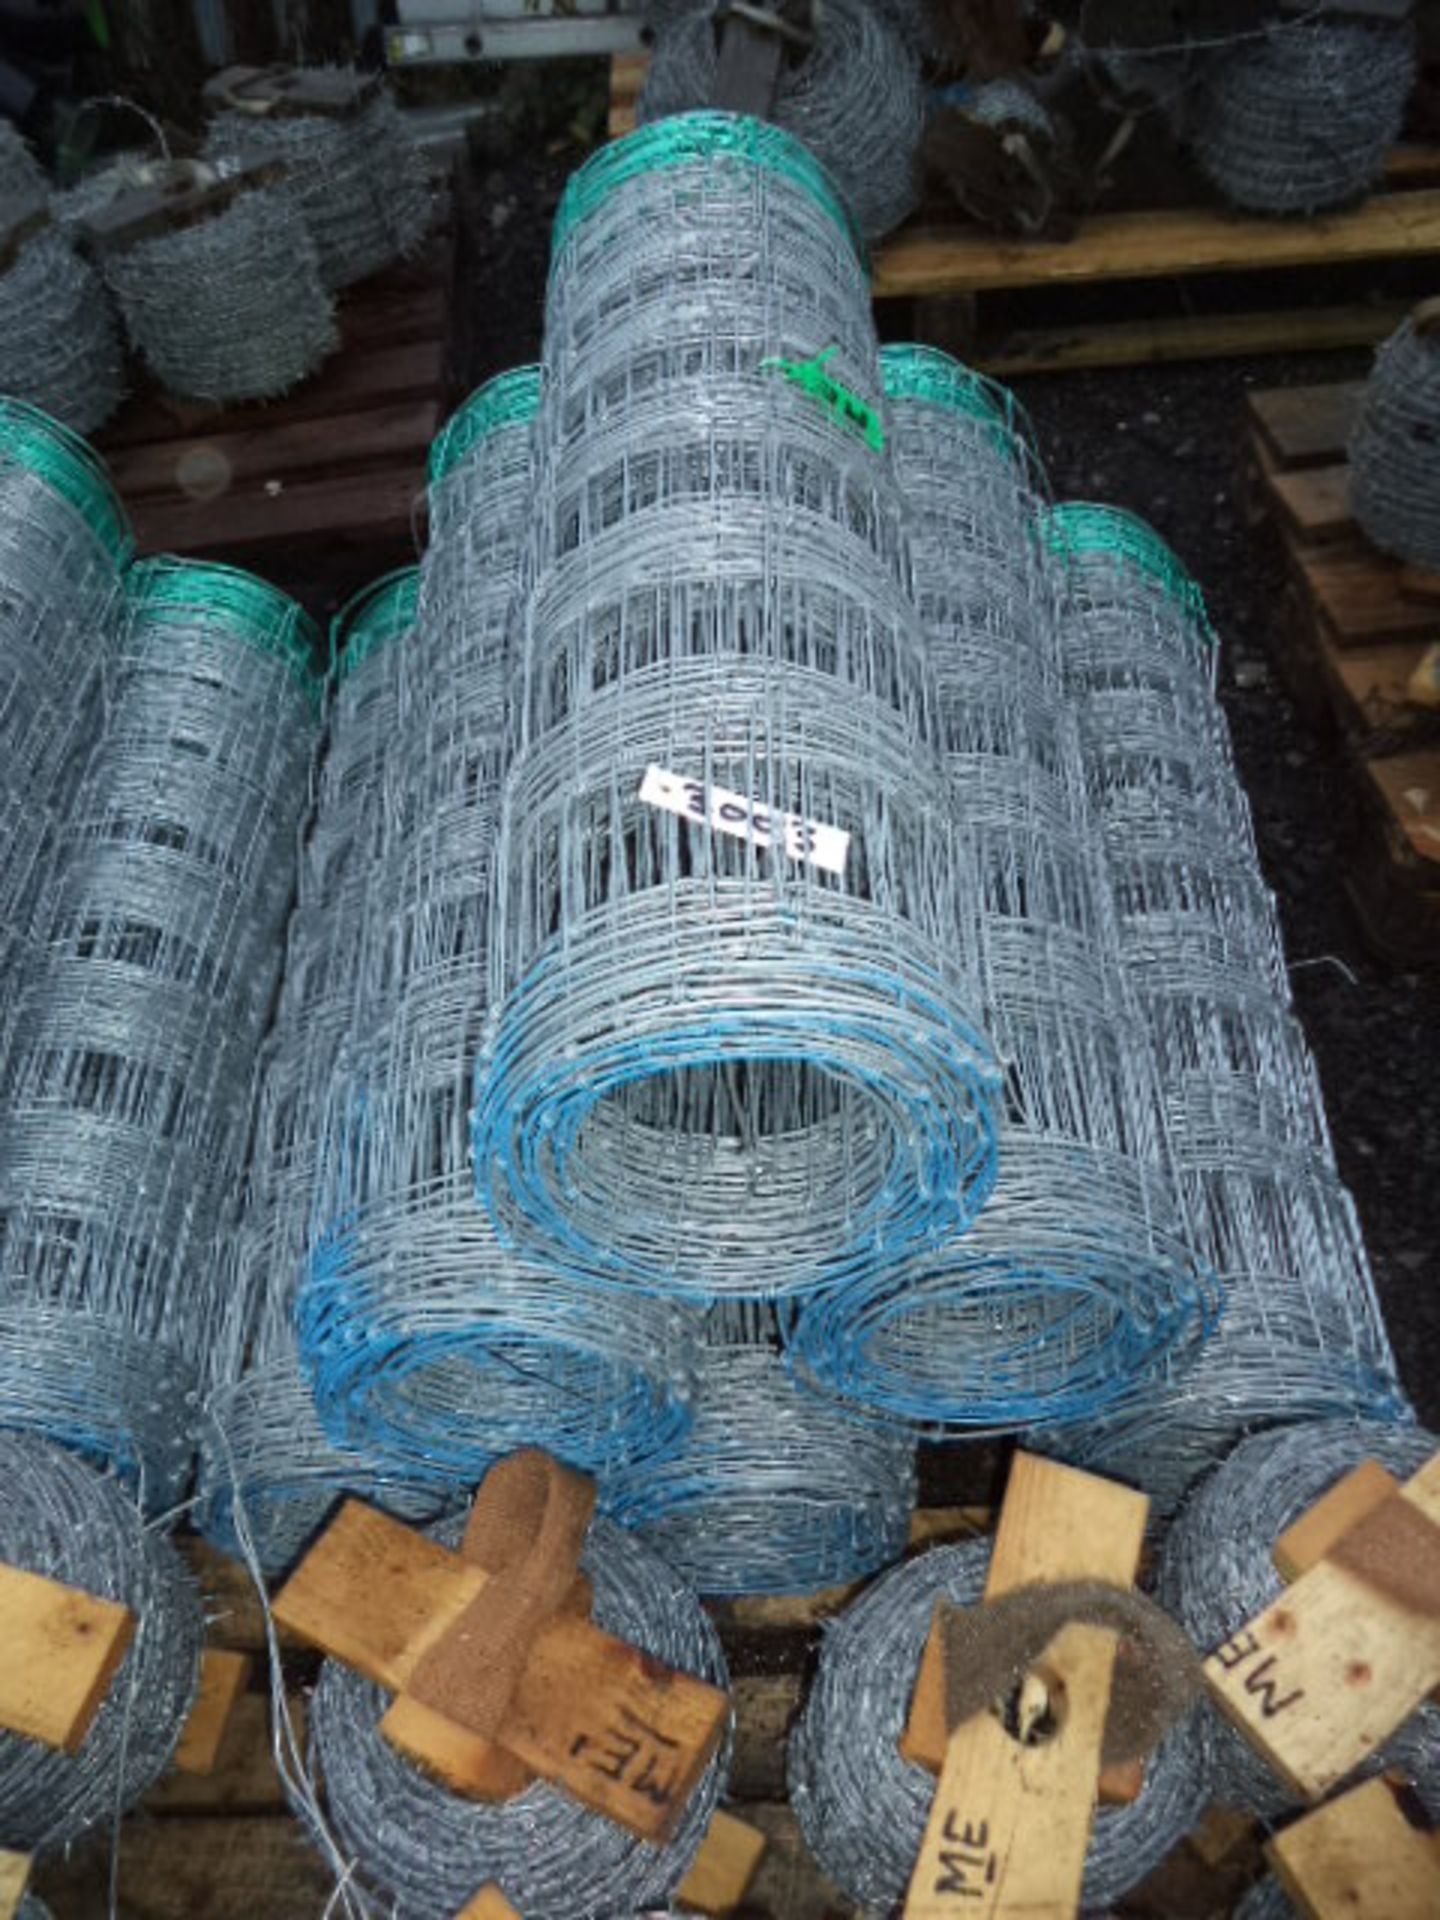 6 x rolls of stock fencing